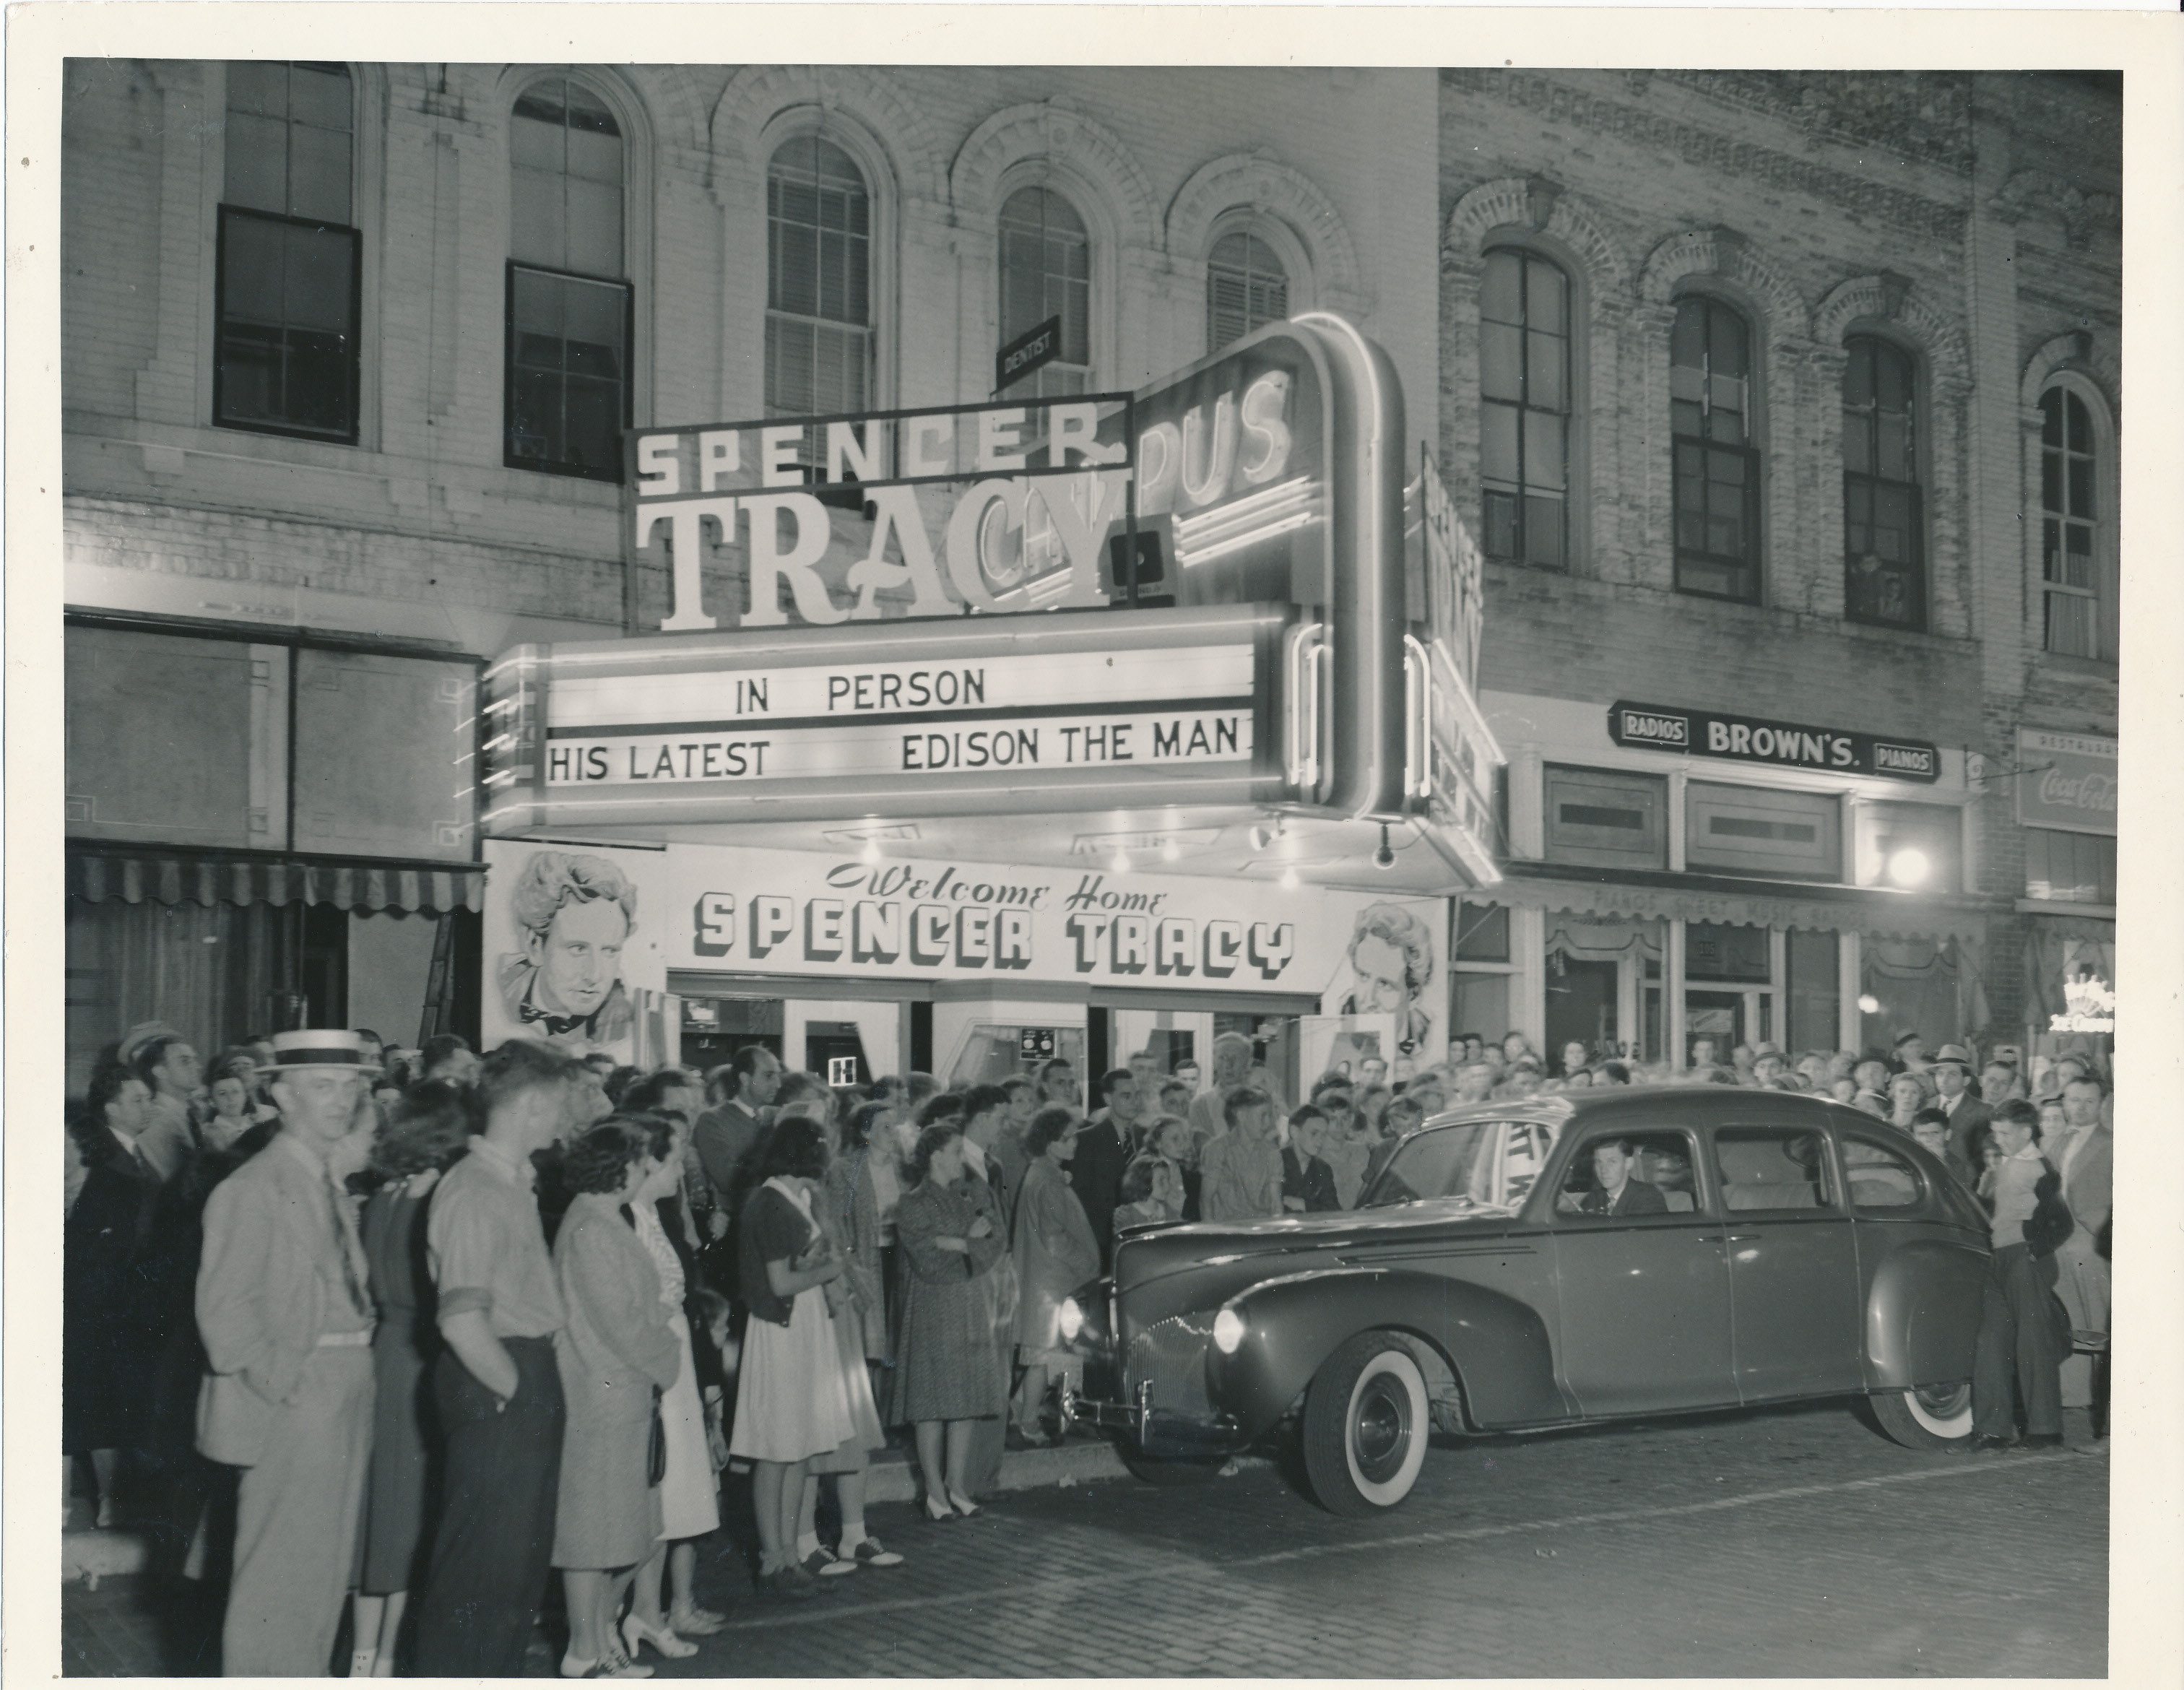 A crowd of people gather outside the movie theater in Ripon, Wisconsin to welcome home Milwaukee native and Ripon College alumnus Spencer Tracy in celebration of his 1940 movie "Edison the Man."